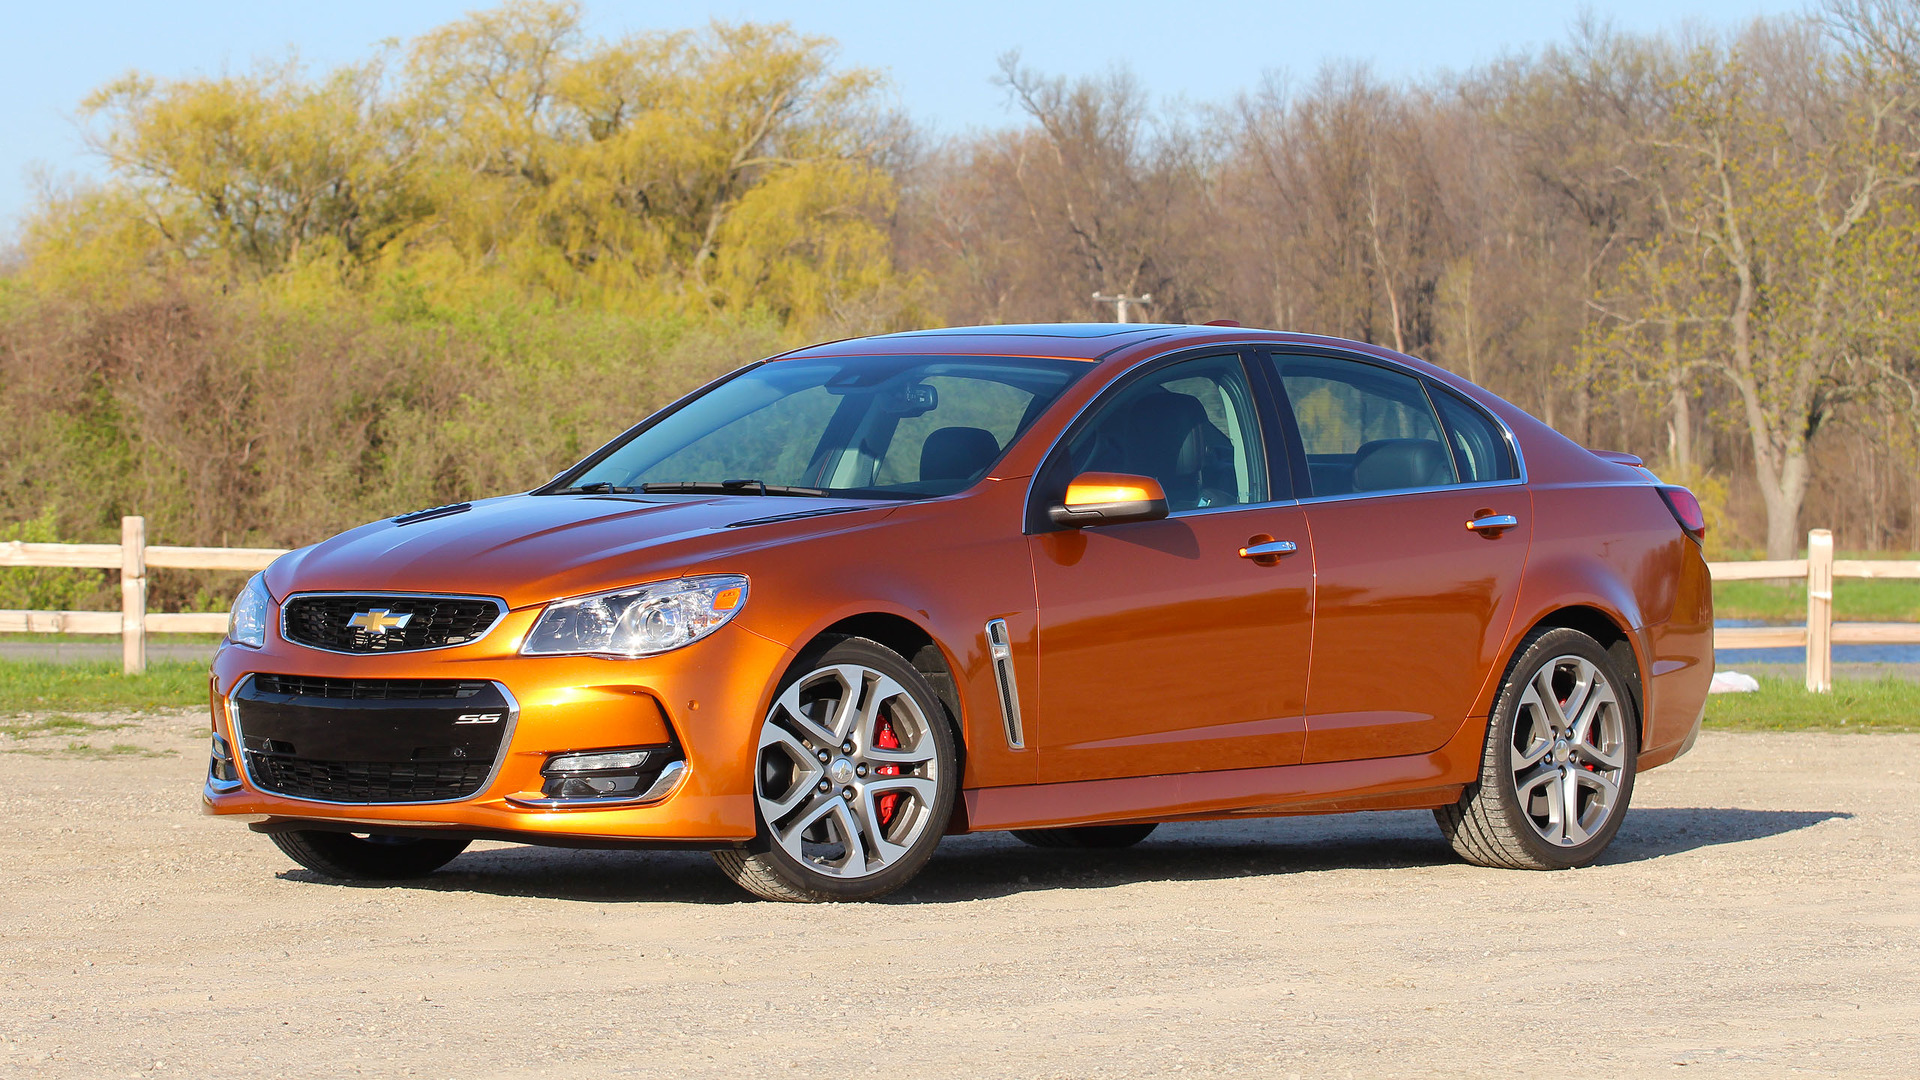 2017 Chevy SS Review: Goodnight, Sweet Prince